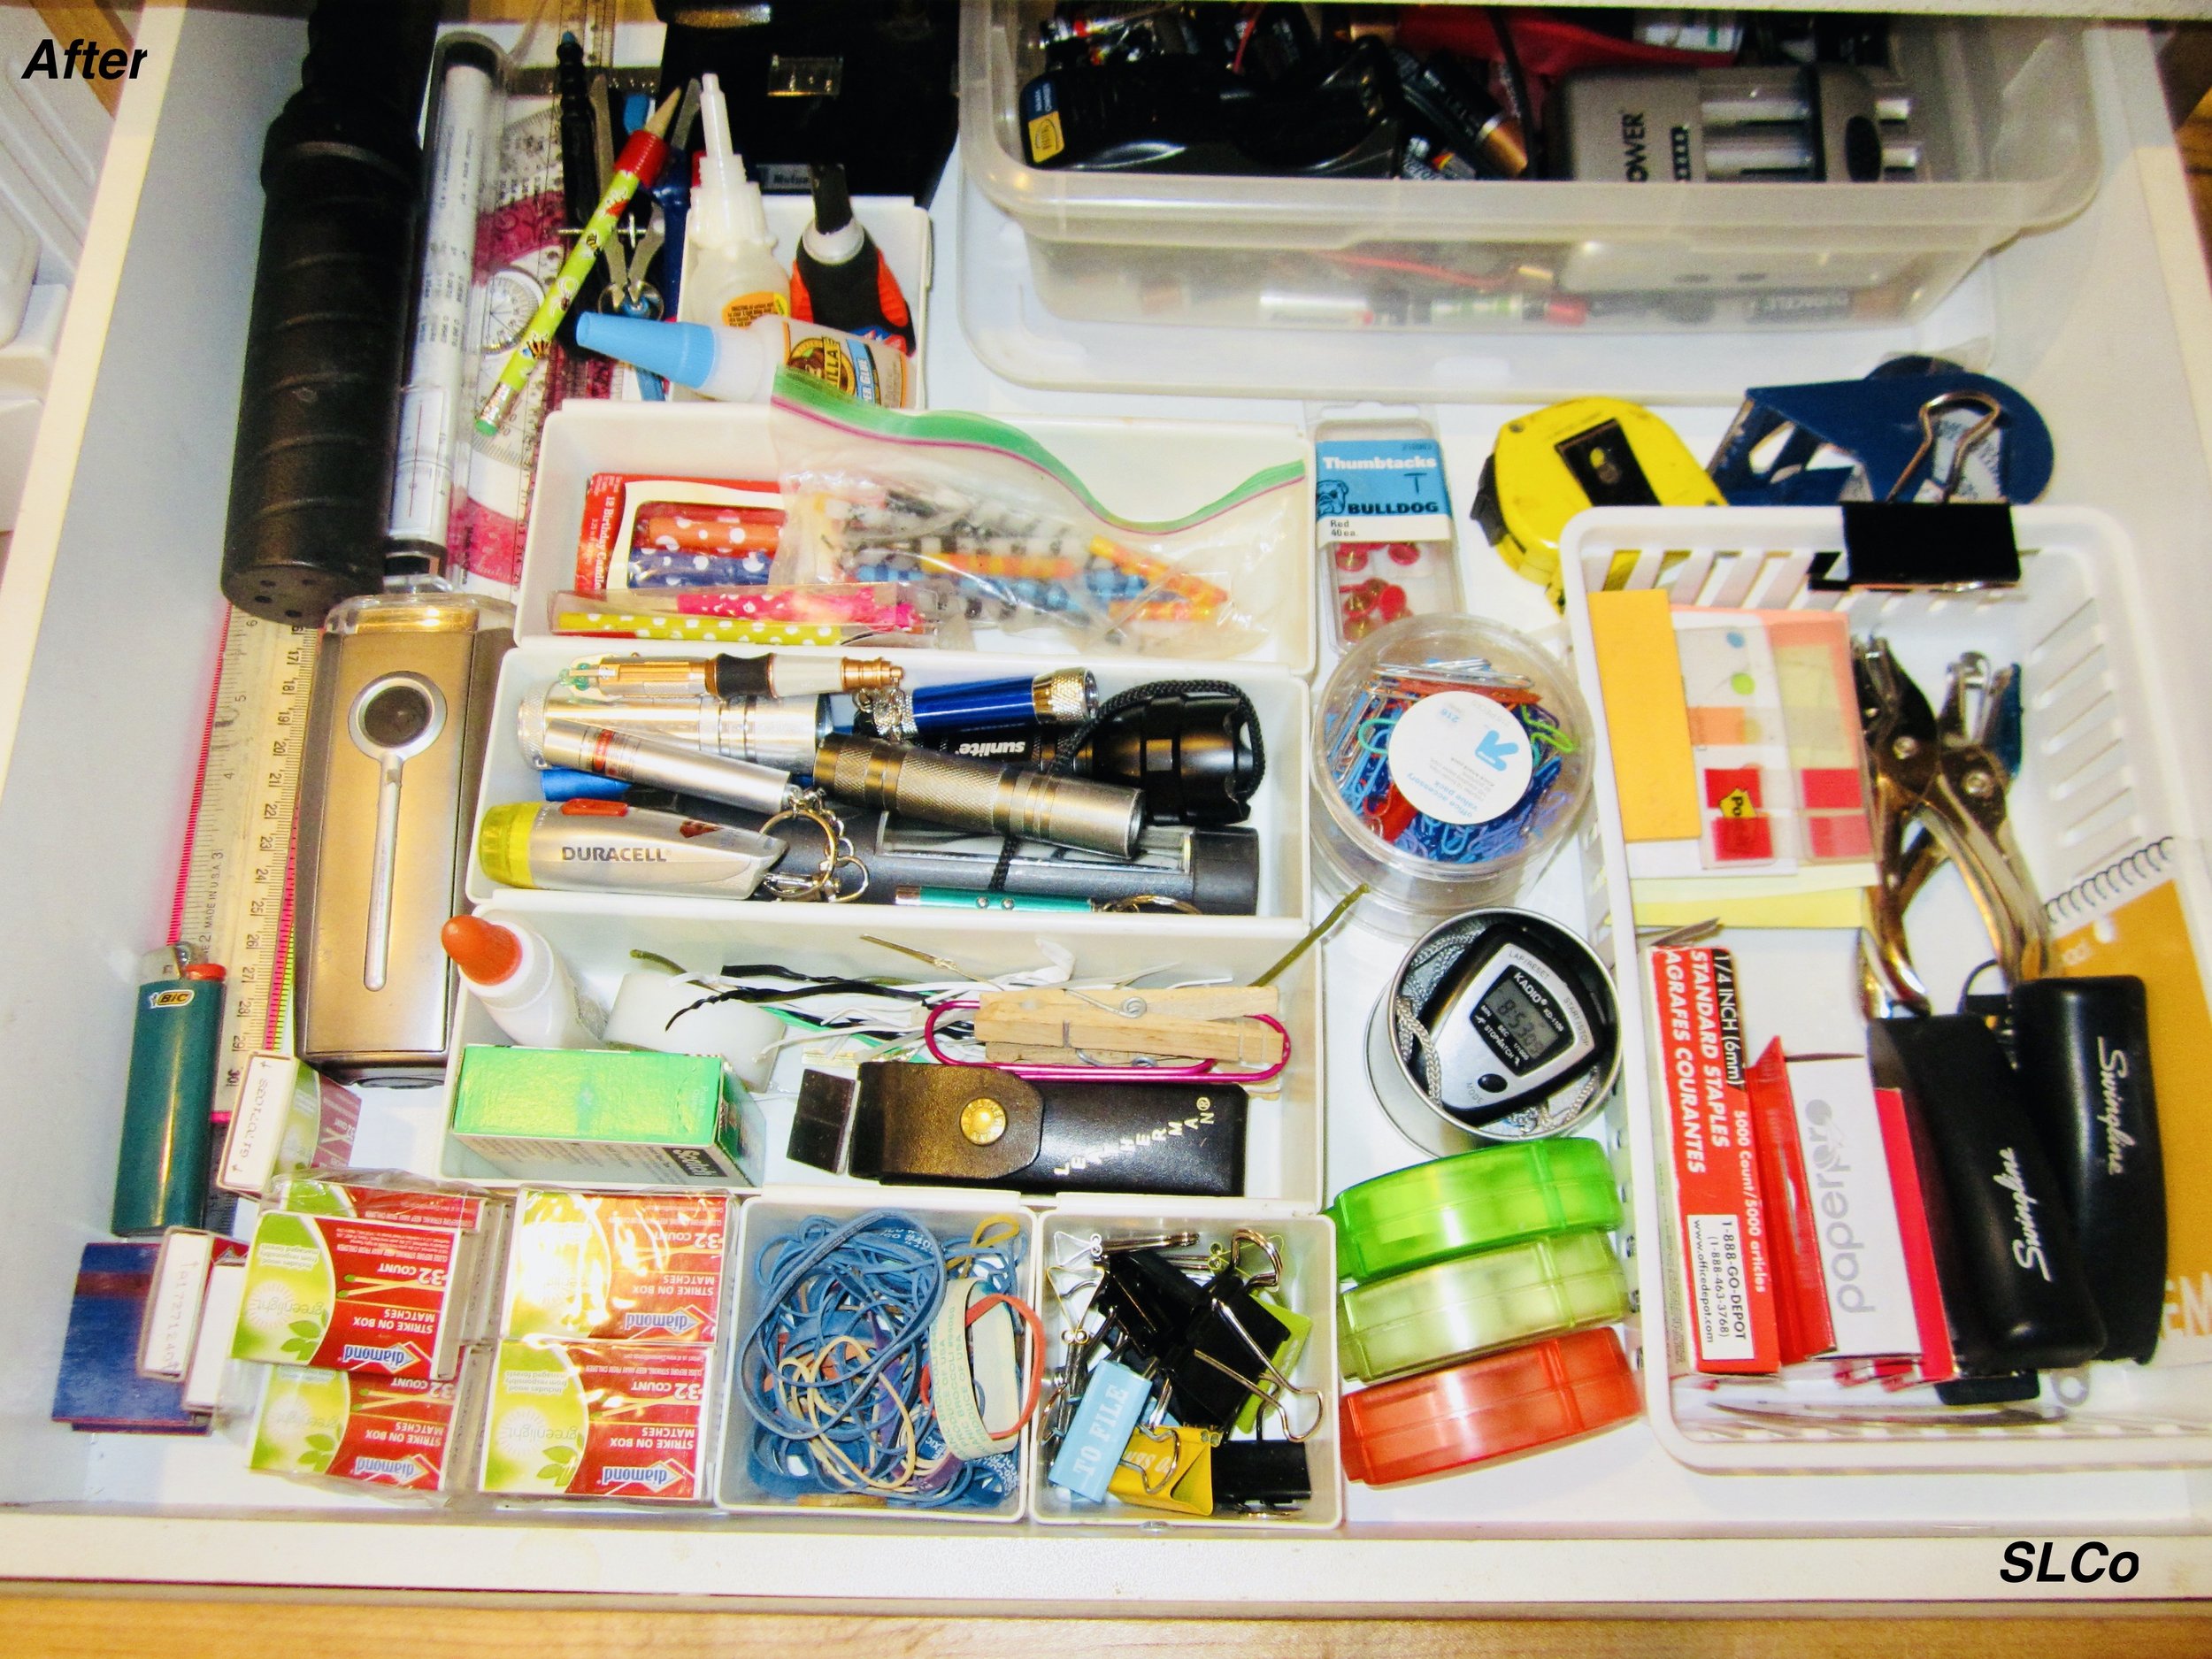 After photo of large drawer with white containers organizing items into staples, rubberbands, pens, and more in an organized manner.